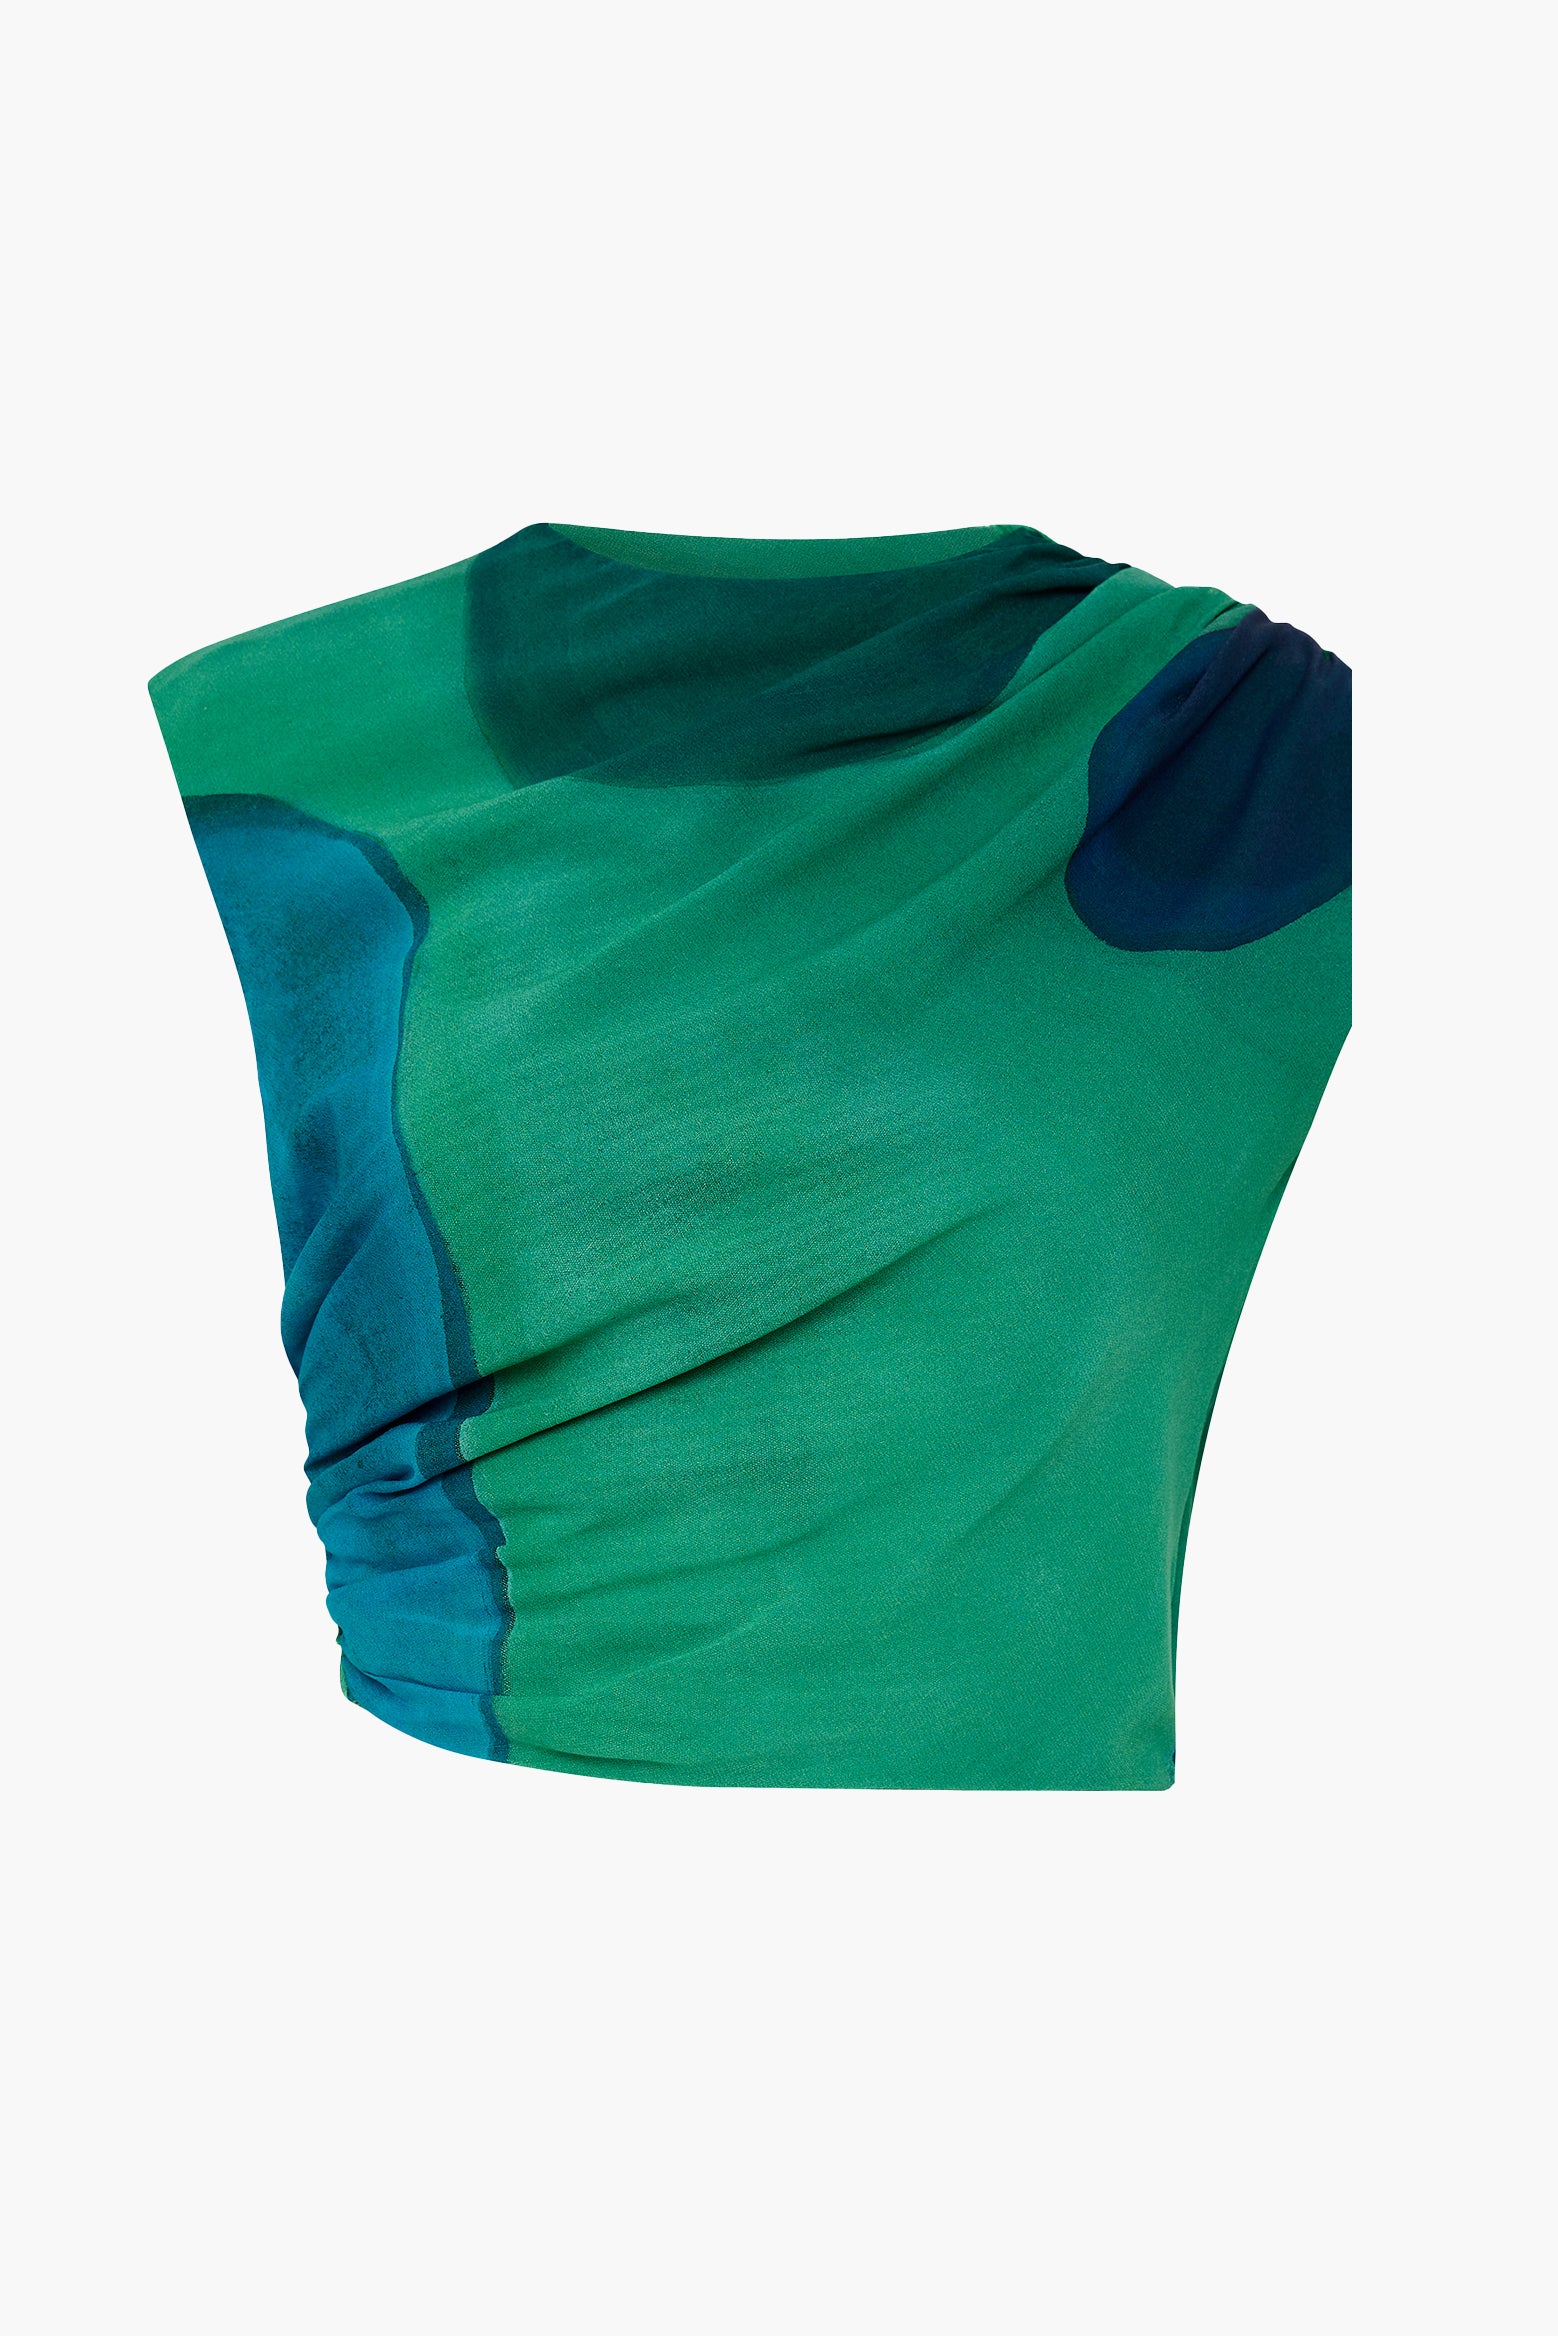 SIR Frankie Gathered Top in Emerald Reflection available at The New Trend Australia.